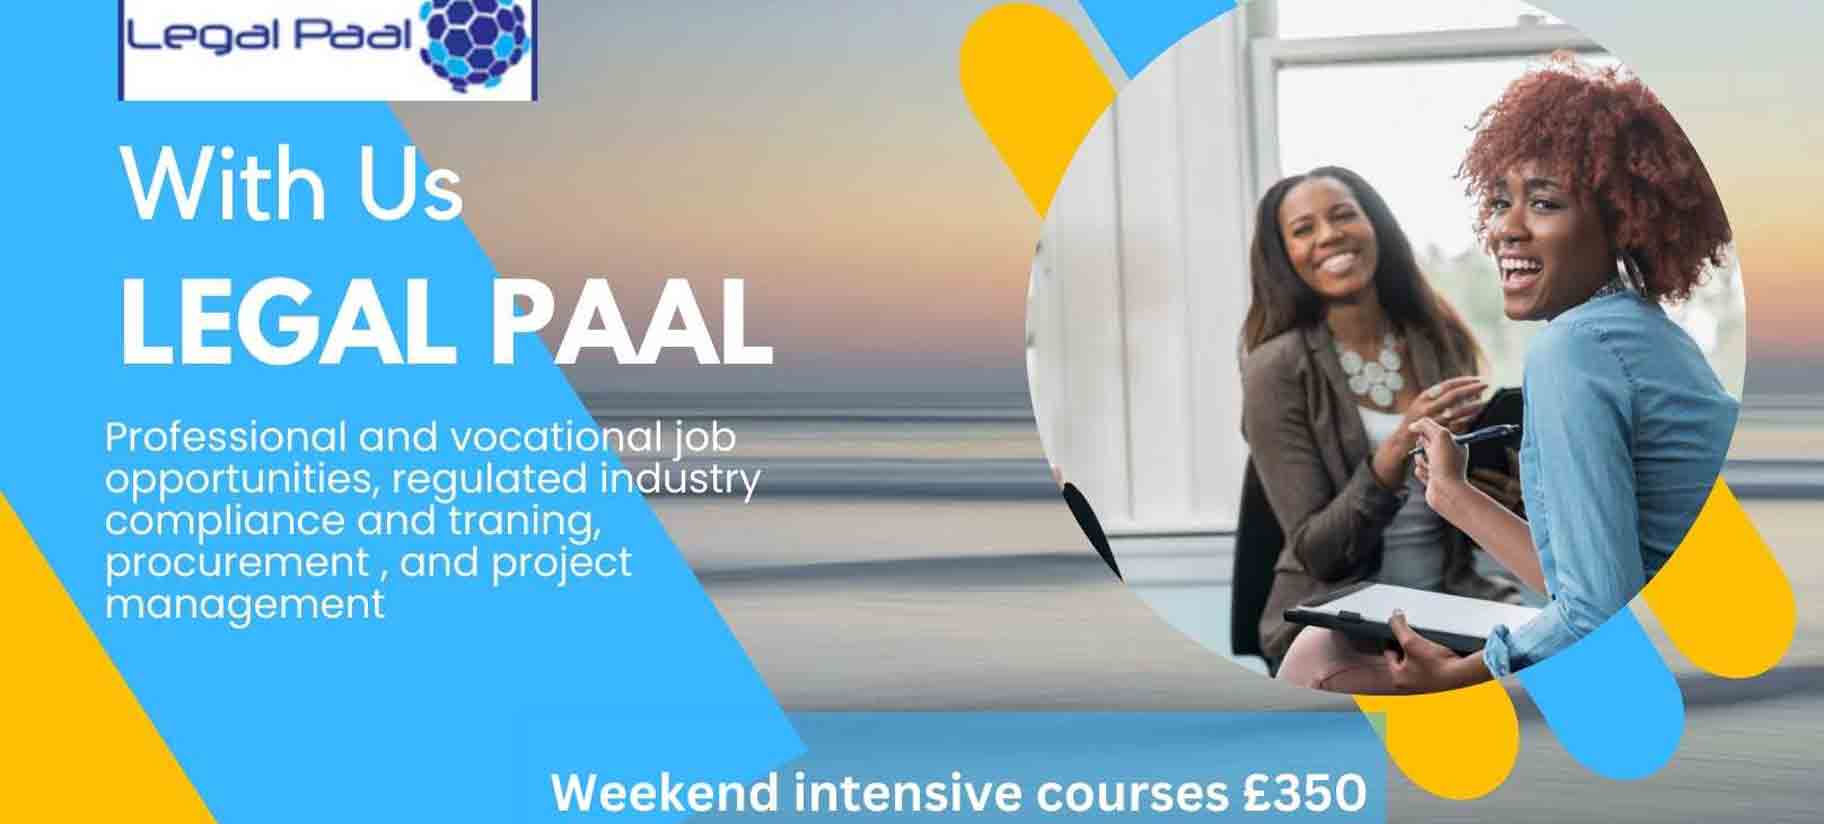 Weekend intensive courses £350 - Banner Image on Legal Paal